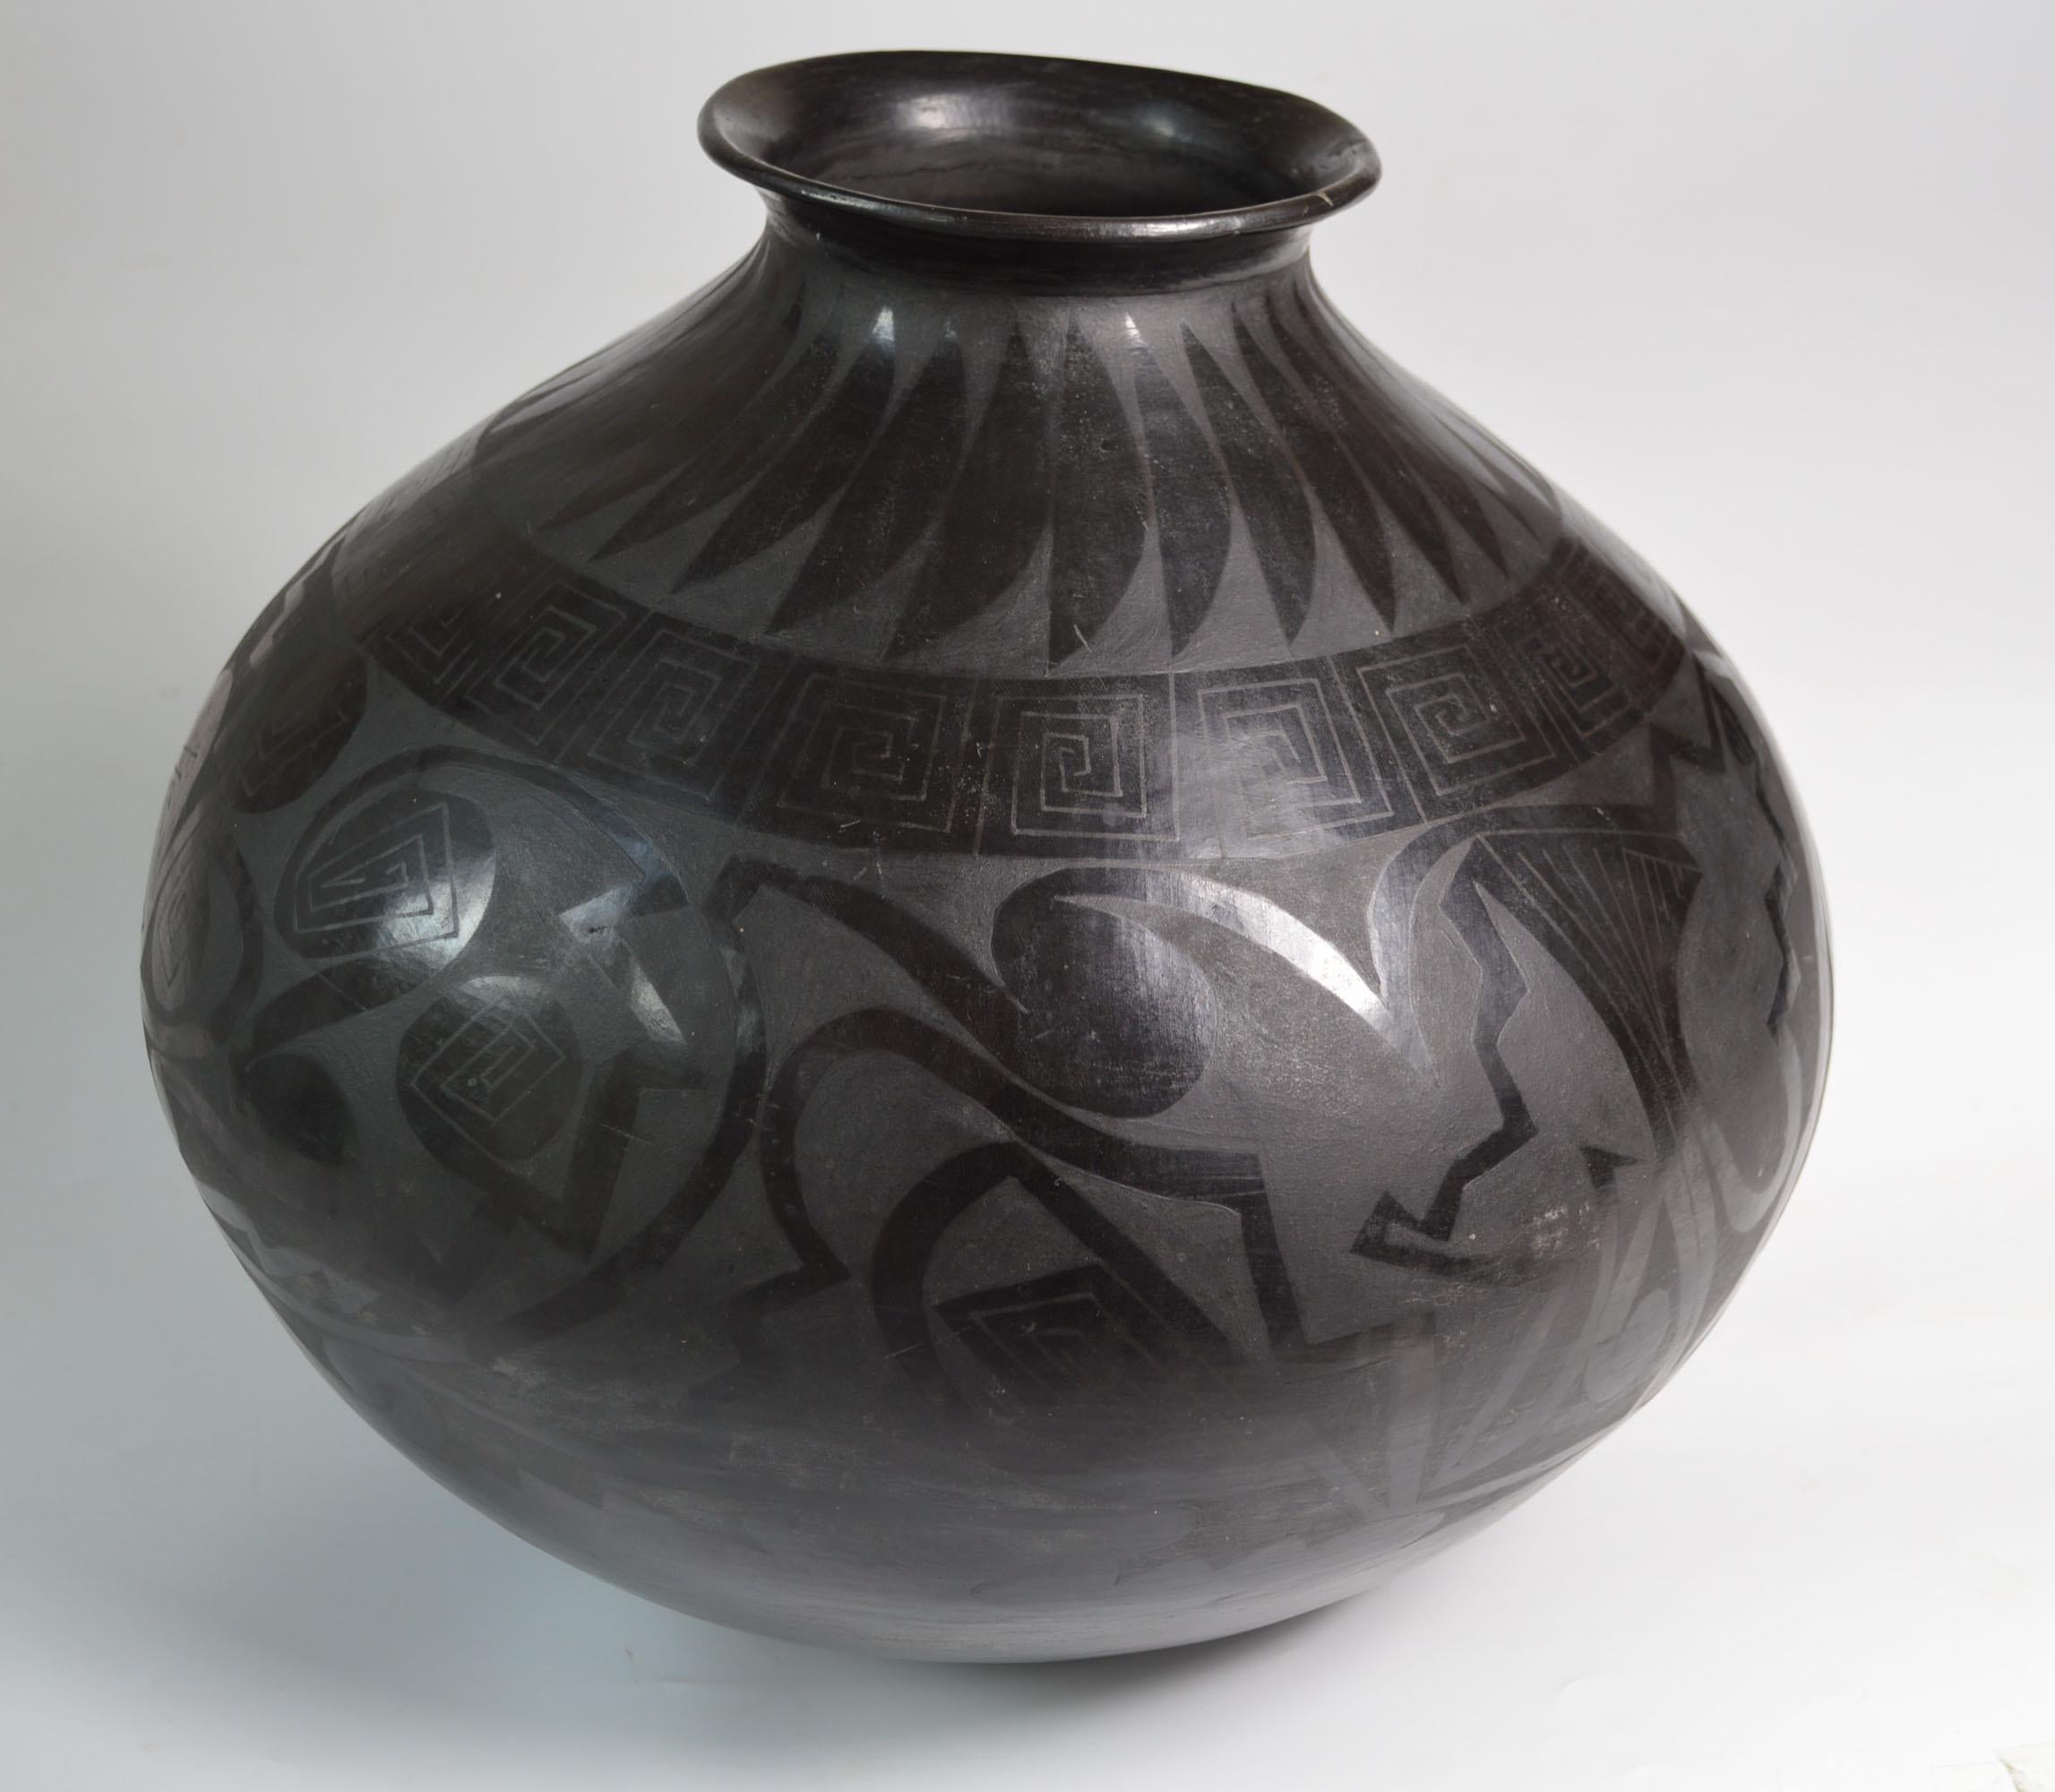 Stunning huge Mata Ortiz Blackware pottery vase by the artist
Gloria Hernandea 

A superb black on black pottery vase with eye dazzling design makes a great piece for interior design or collector’s item

Signed Gloria Hdez

Measures: Height